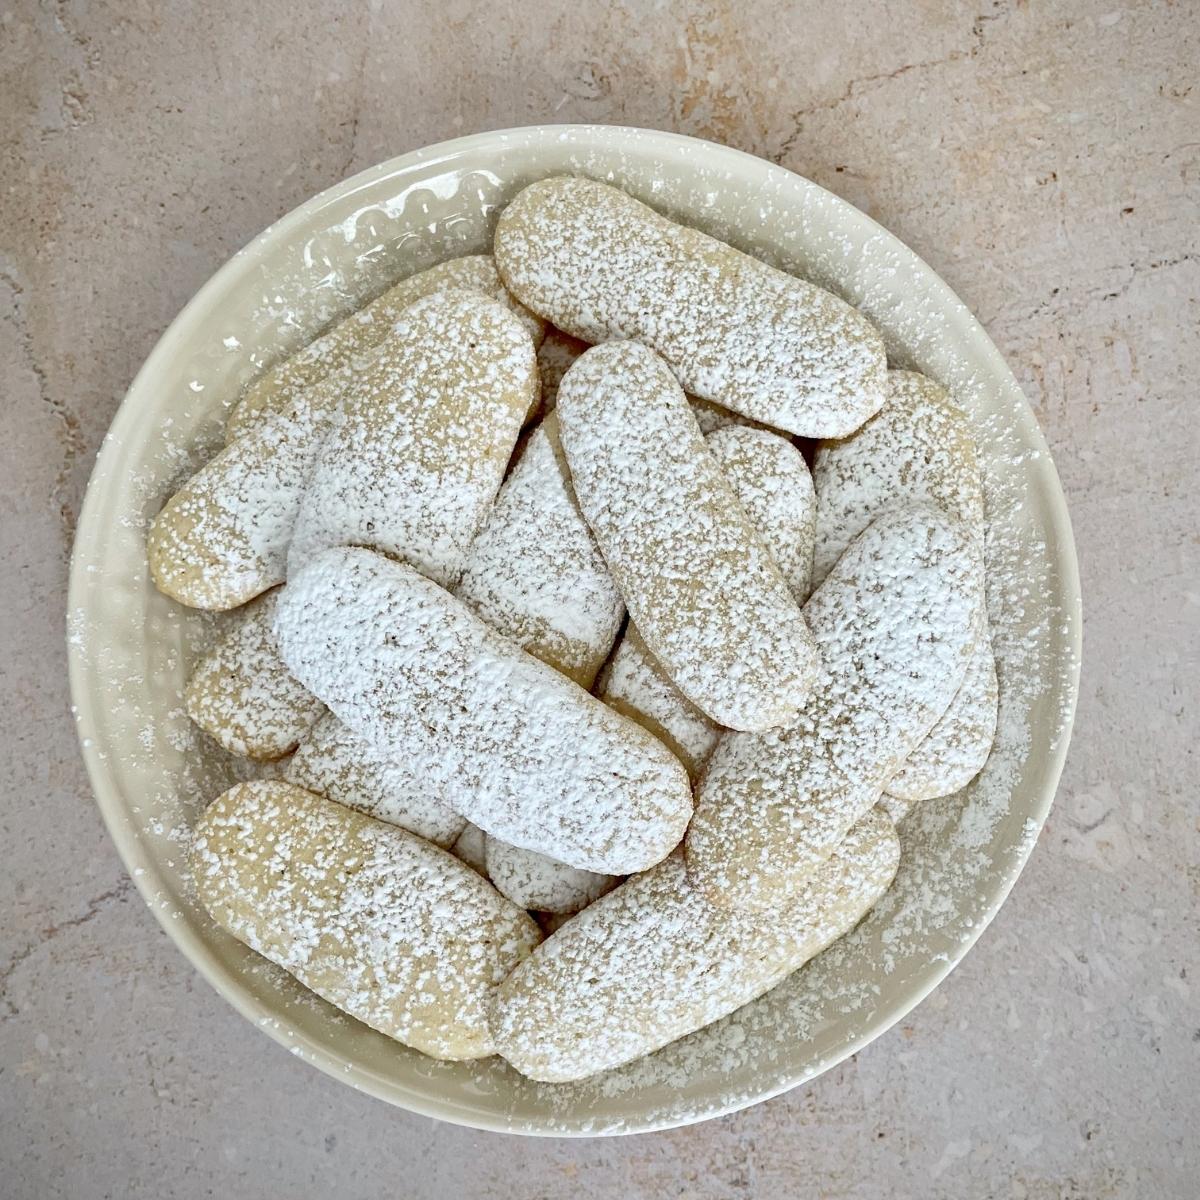 A plate of vegan ladyfingers with powdered sugar.